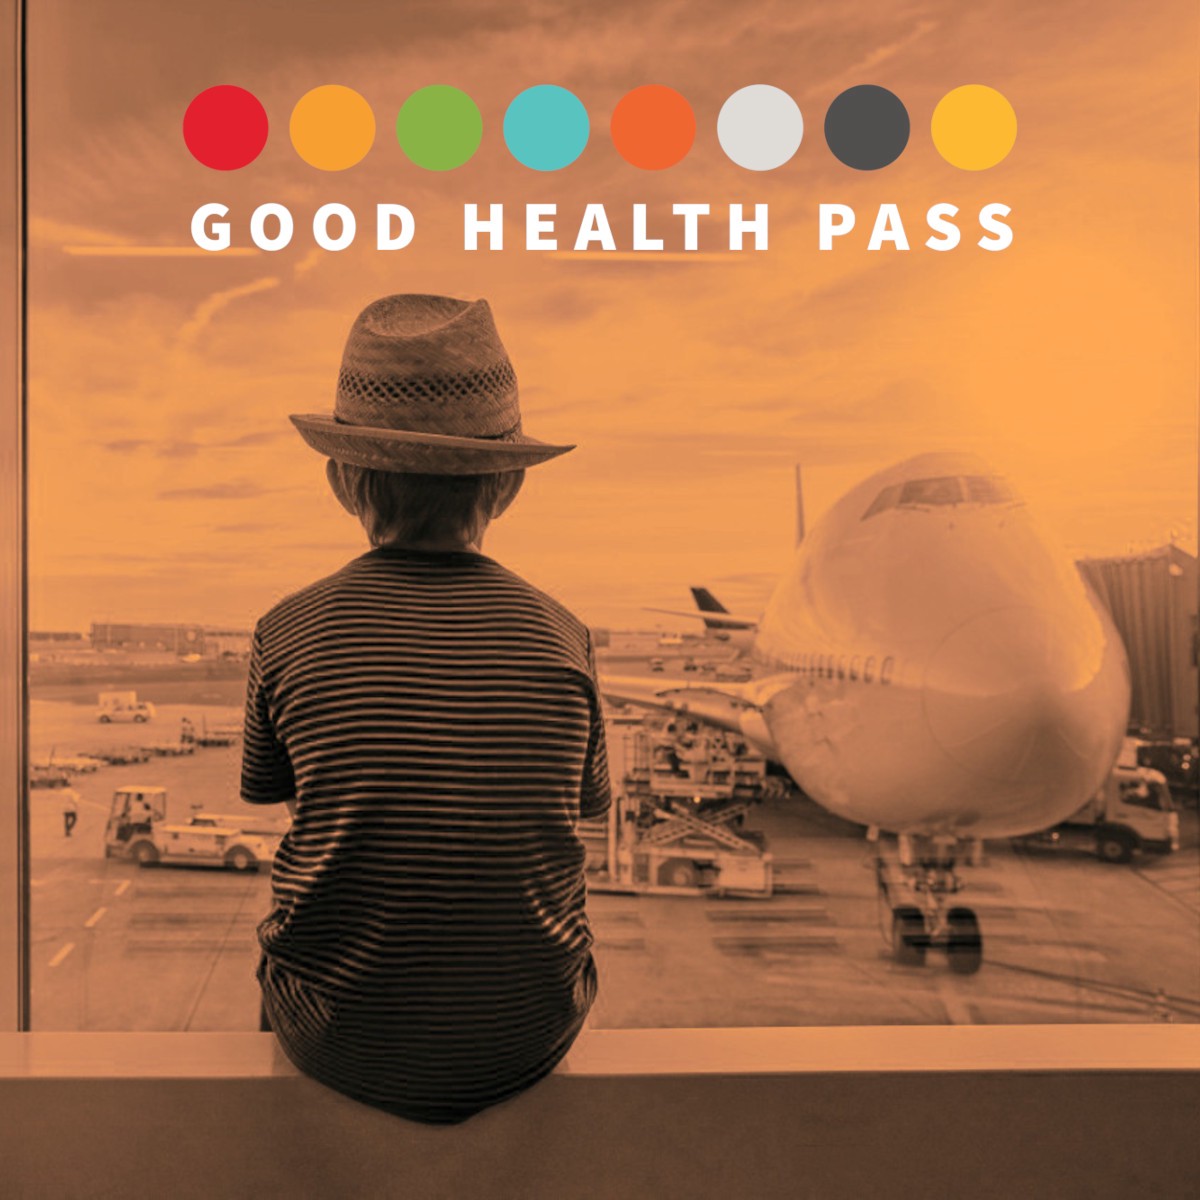 2.'Our members are creating a blueprint for interoperable digital identity and health pass systems and building a safe path to restore international travel and restart the global economy.'Website: https://www.goodhealthpass.org/ White Paper: https://www.goodhealthpass.org/wp-content/uploads/2021/02/Good-Health-Pass-Collaborative-Principles-Paper.pdf